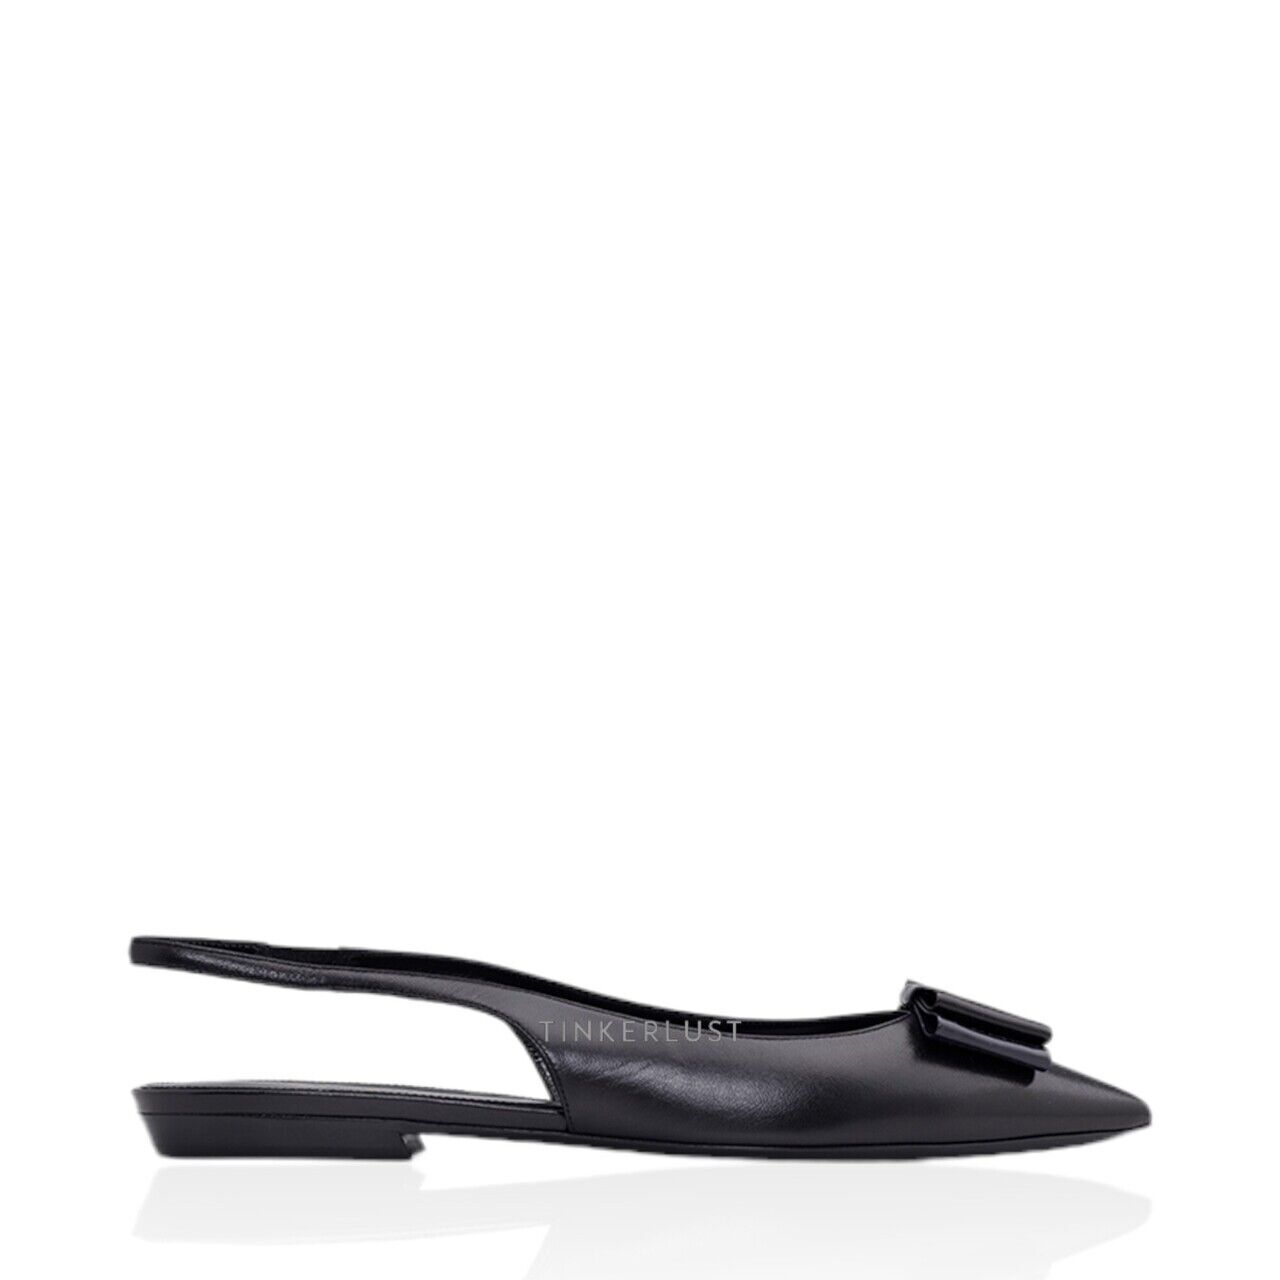 Saint Laurent Anais in Black/Navy Smooth Leather Slingback Flat